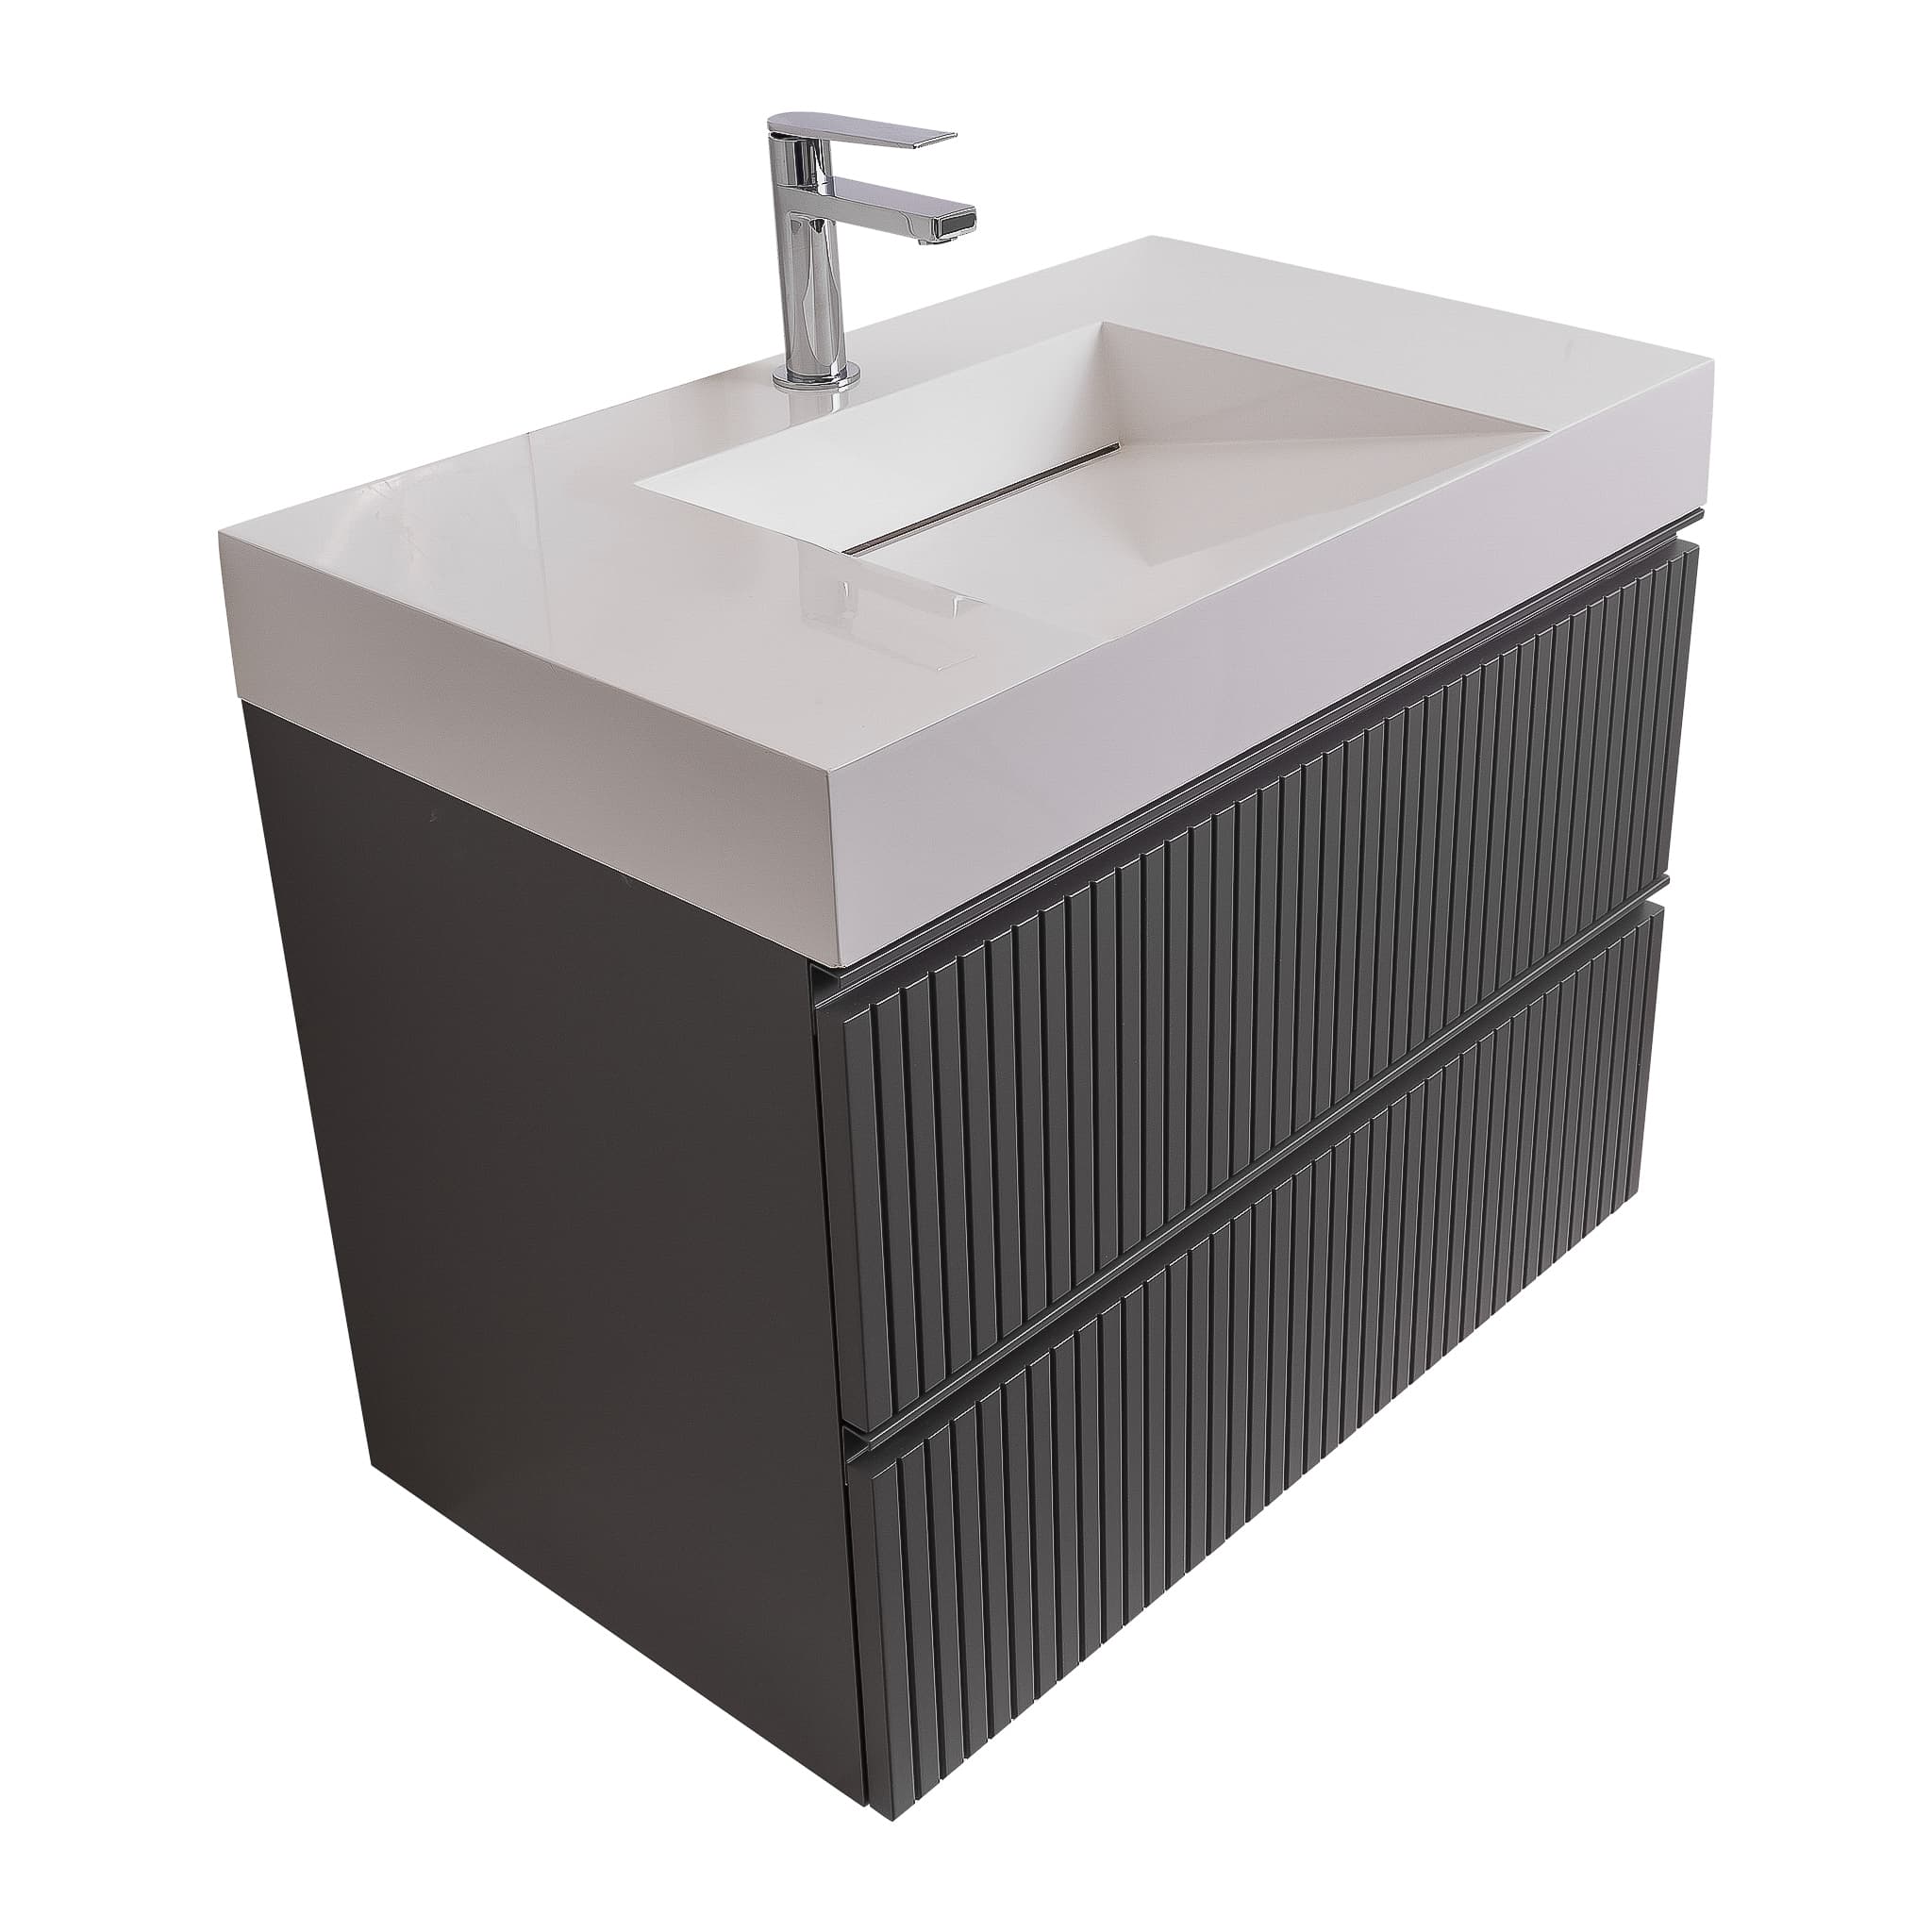 Ares 39.5 Matte Grey Cabinet, Infinity Cultured Marble Sink, Wall Mounted Modern Vanity Set